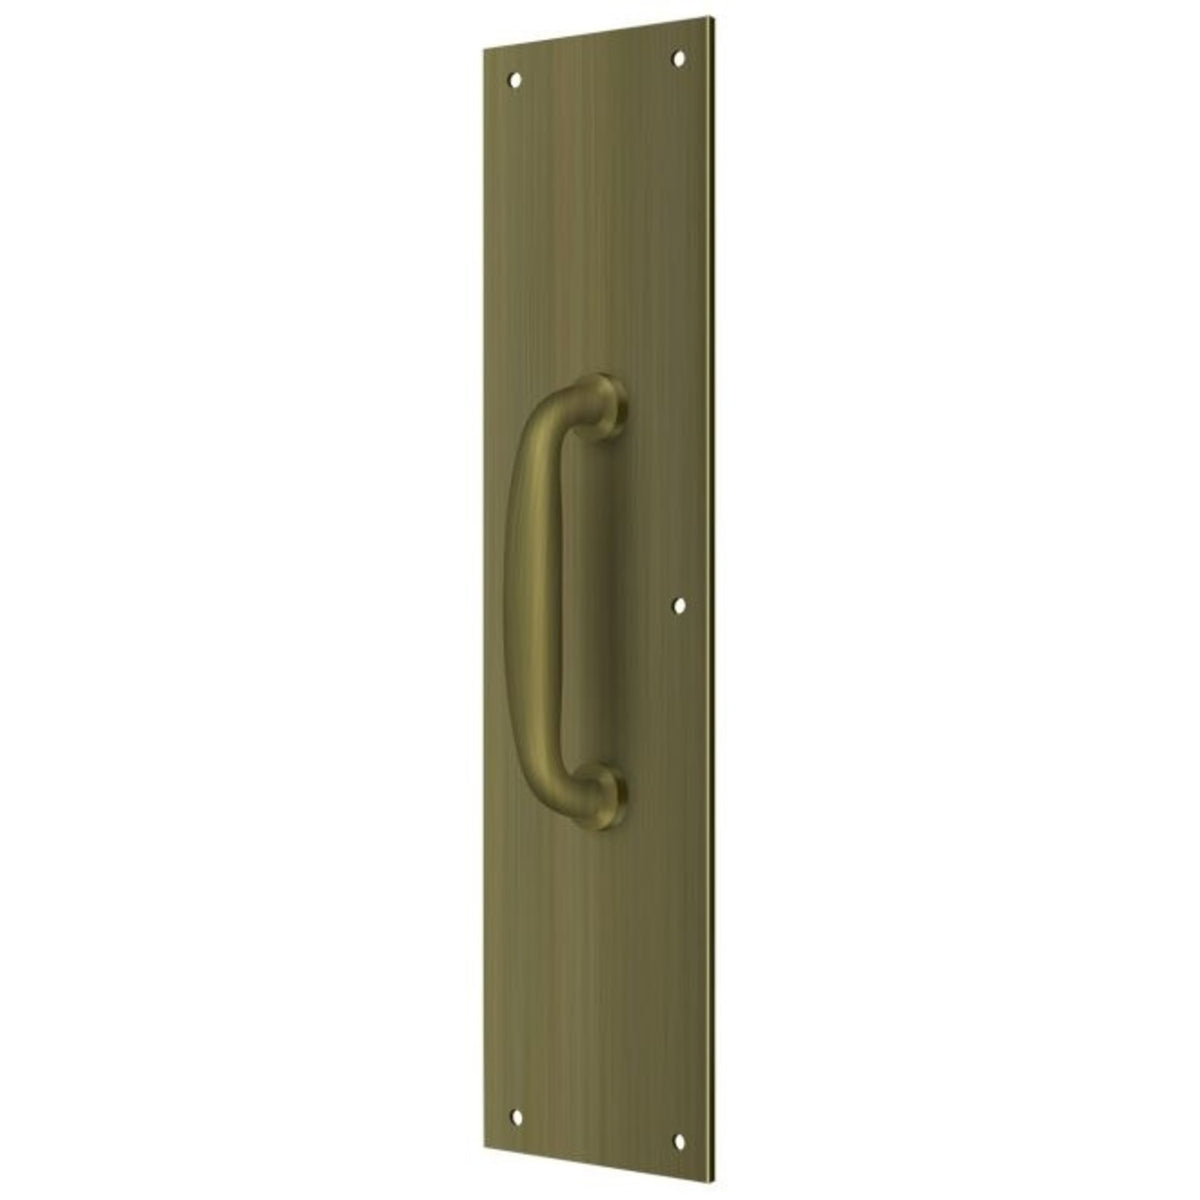 Deltana PPH55U5 Push Plate With Handle, Antique Brass